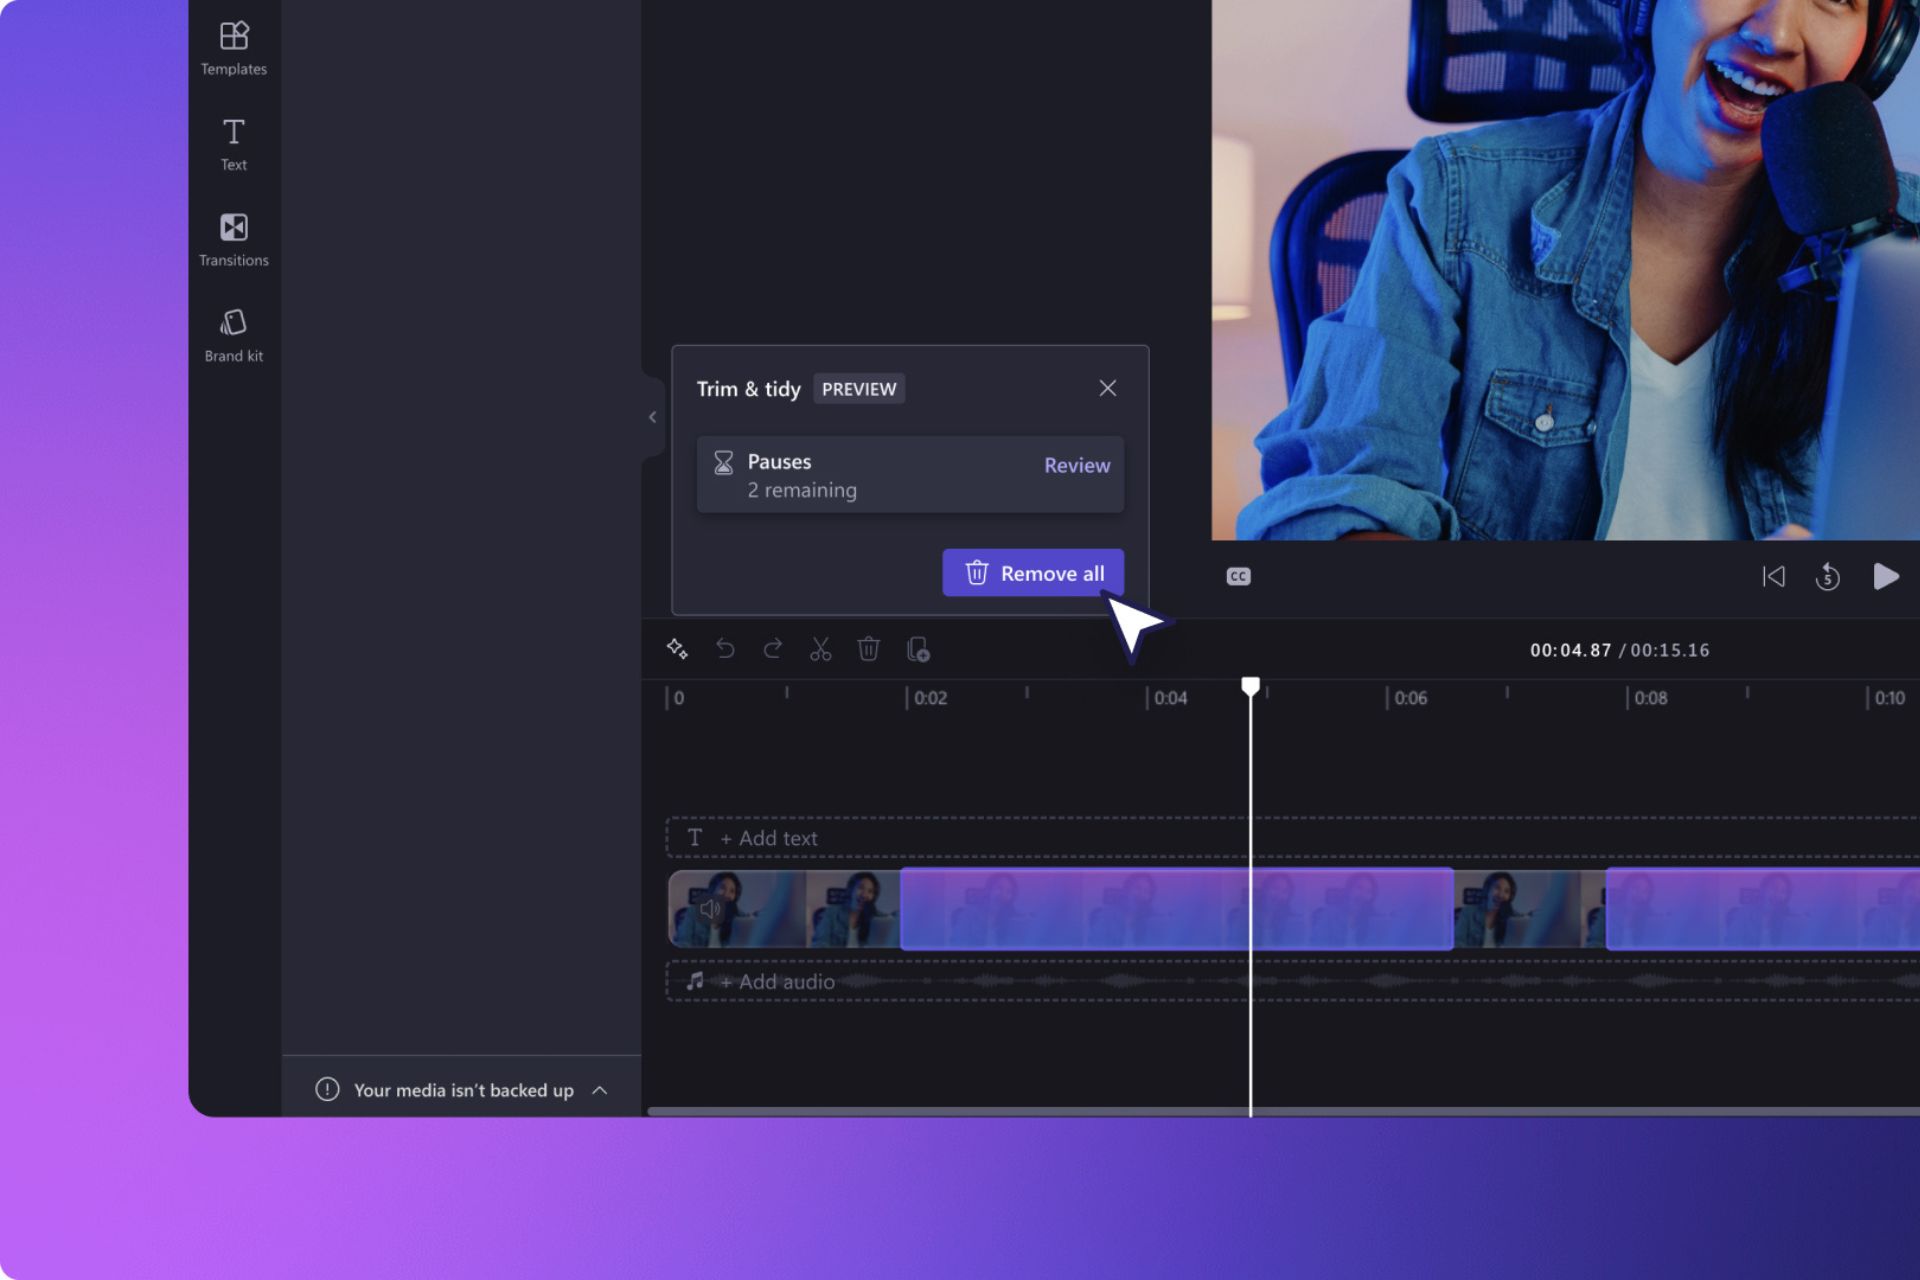 Microsoft Clipchamp is now capable of automatically cleaning long videos